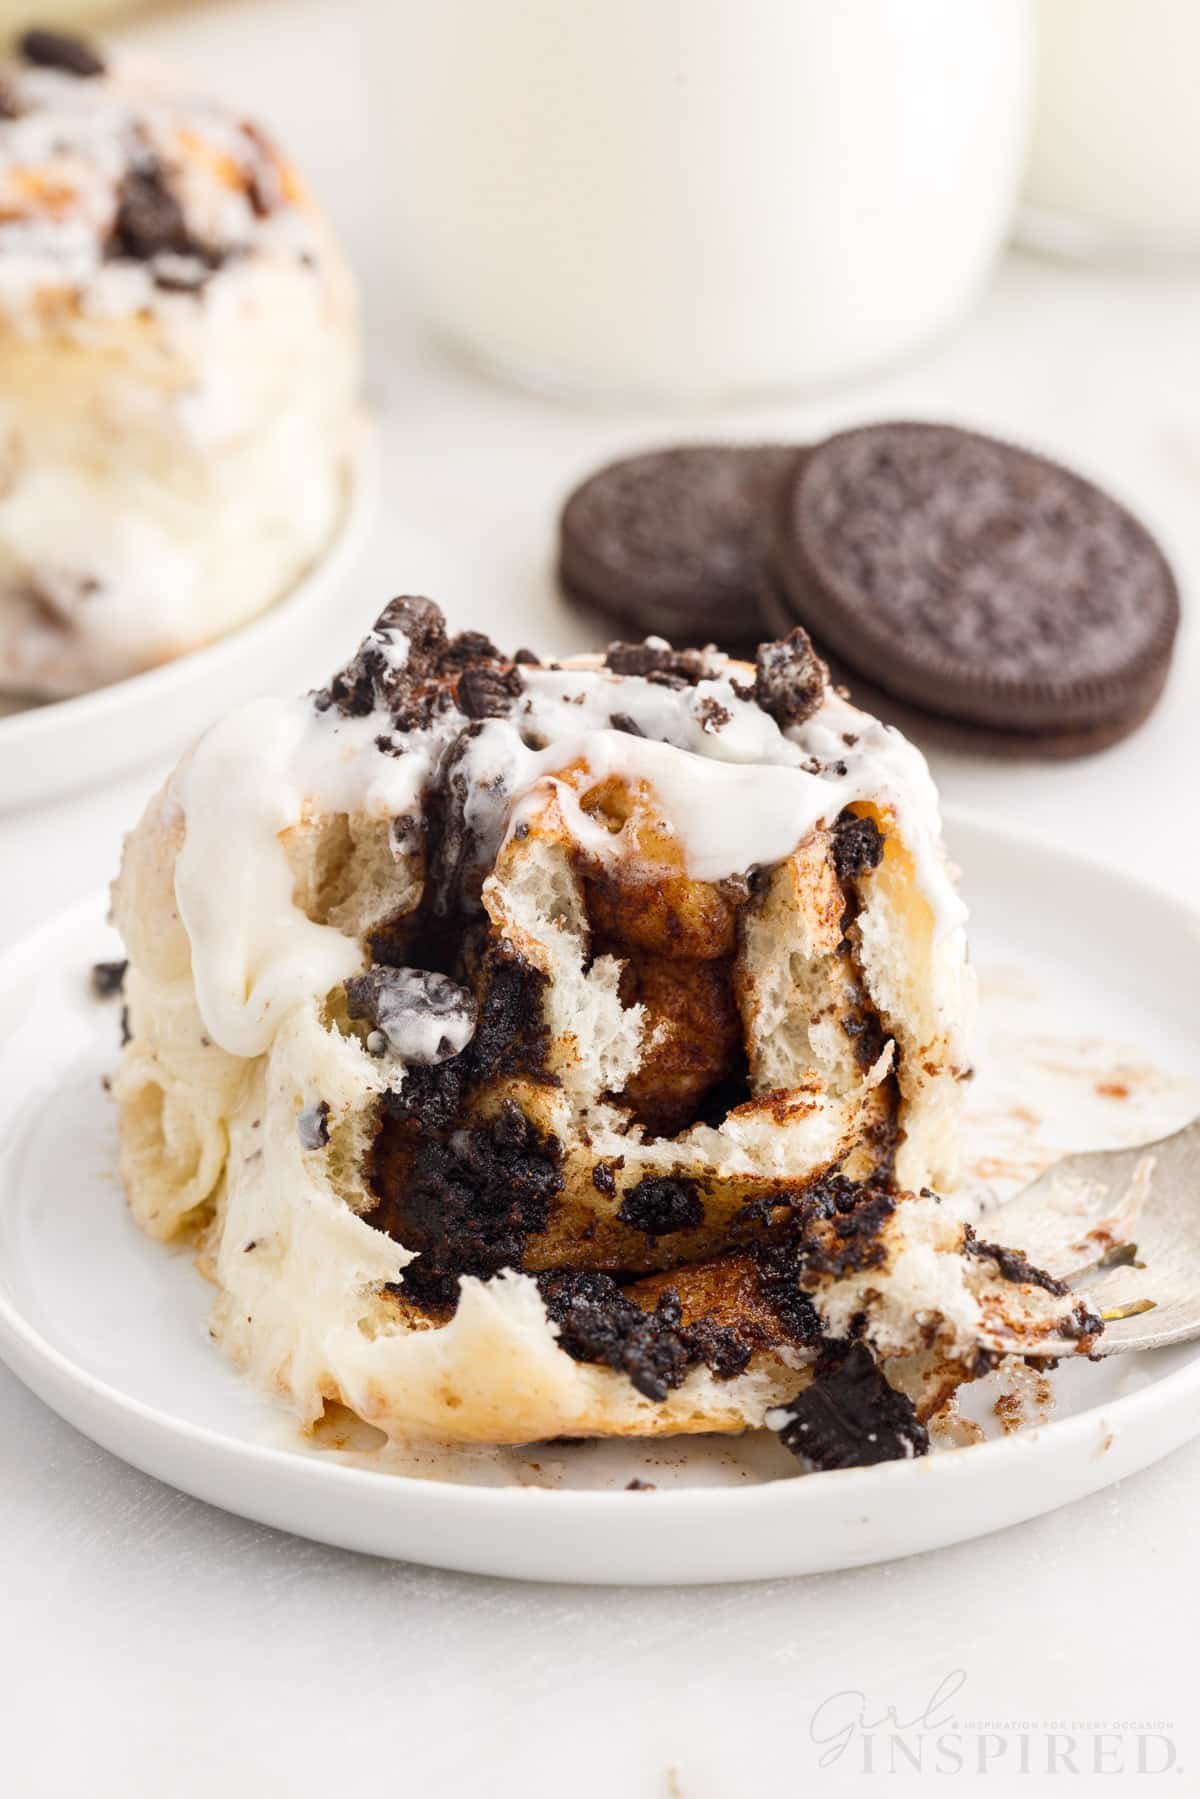 A Cookies and Cream Cinnamon Roll on a plate with a bite taken from the front.